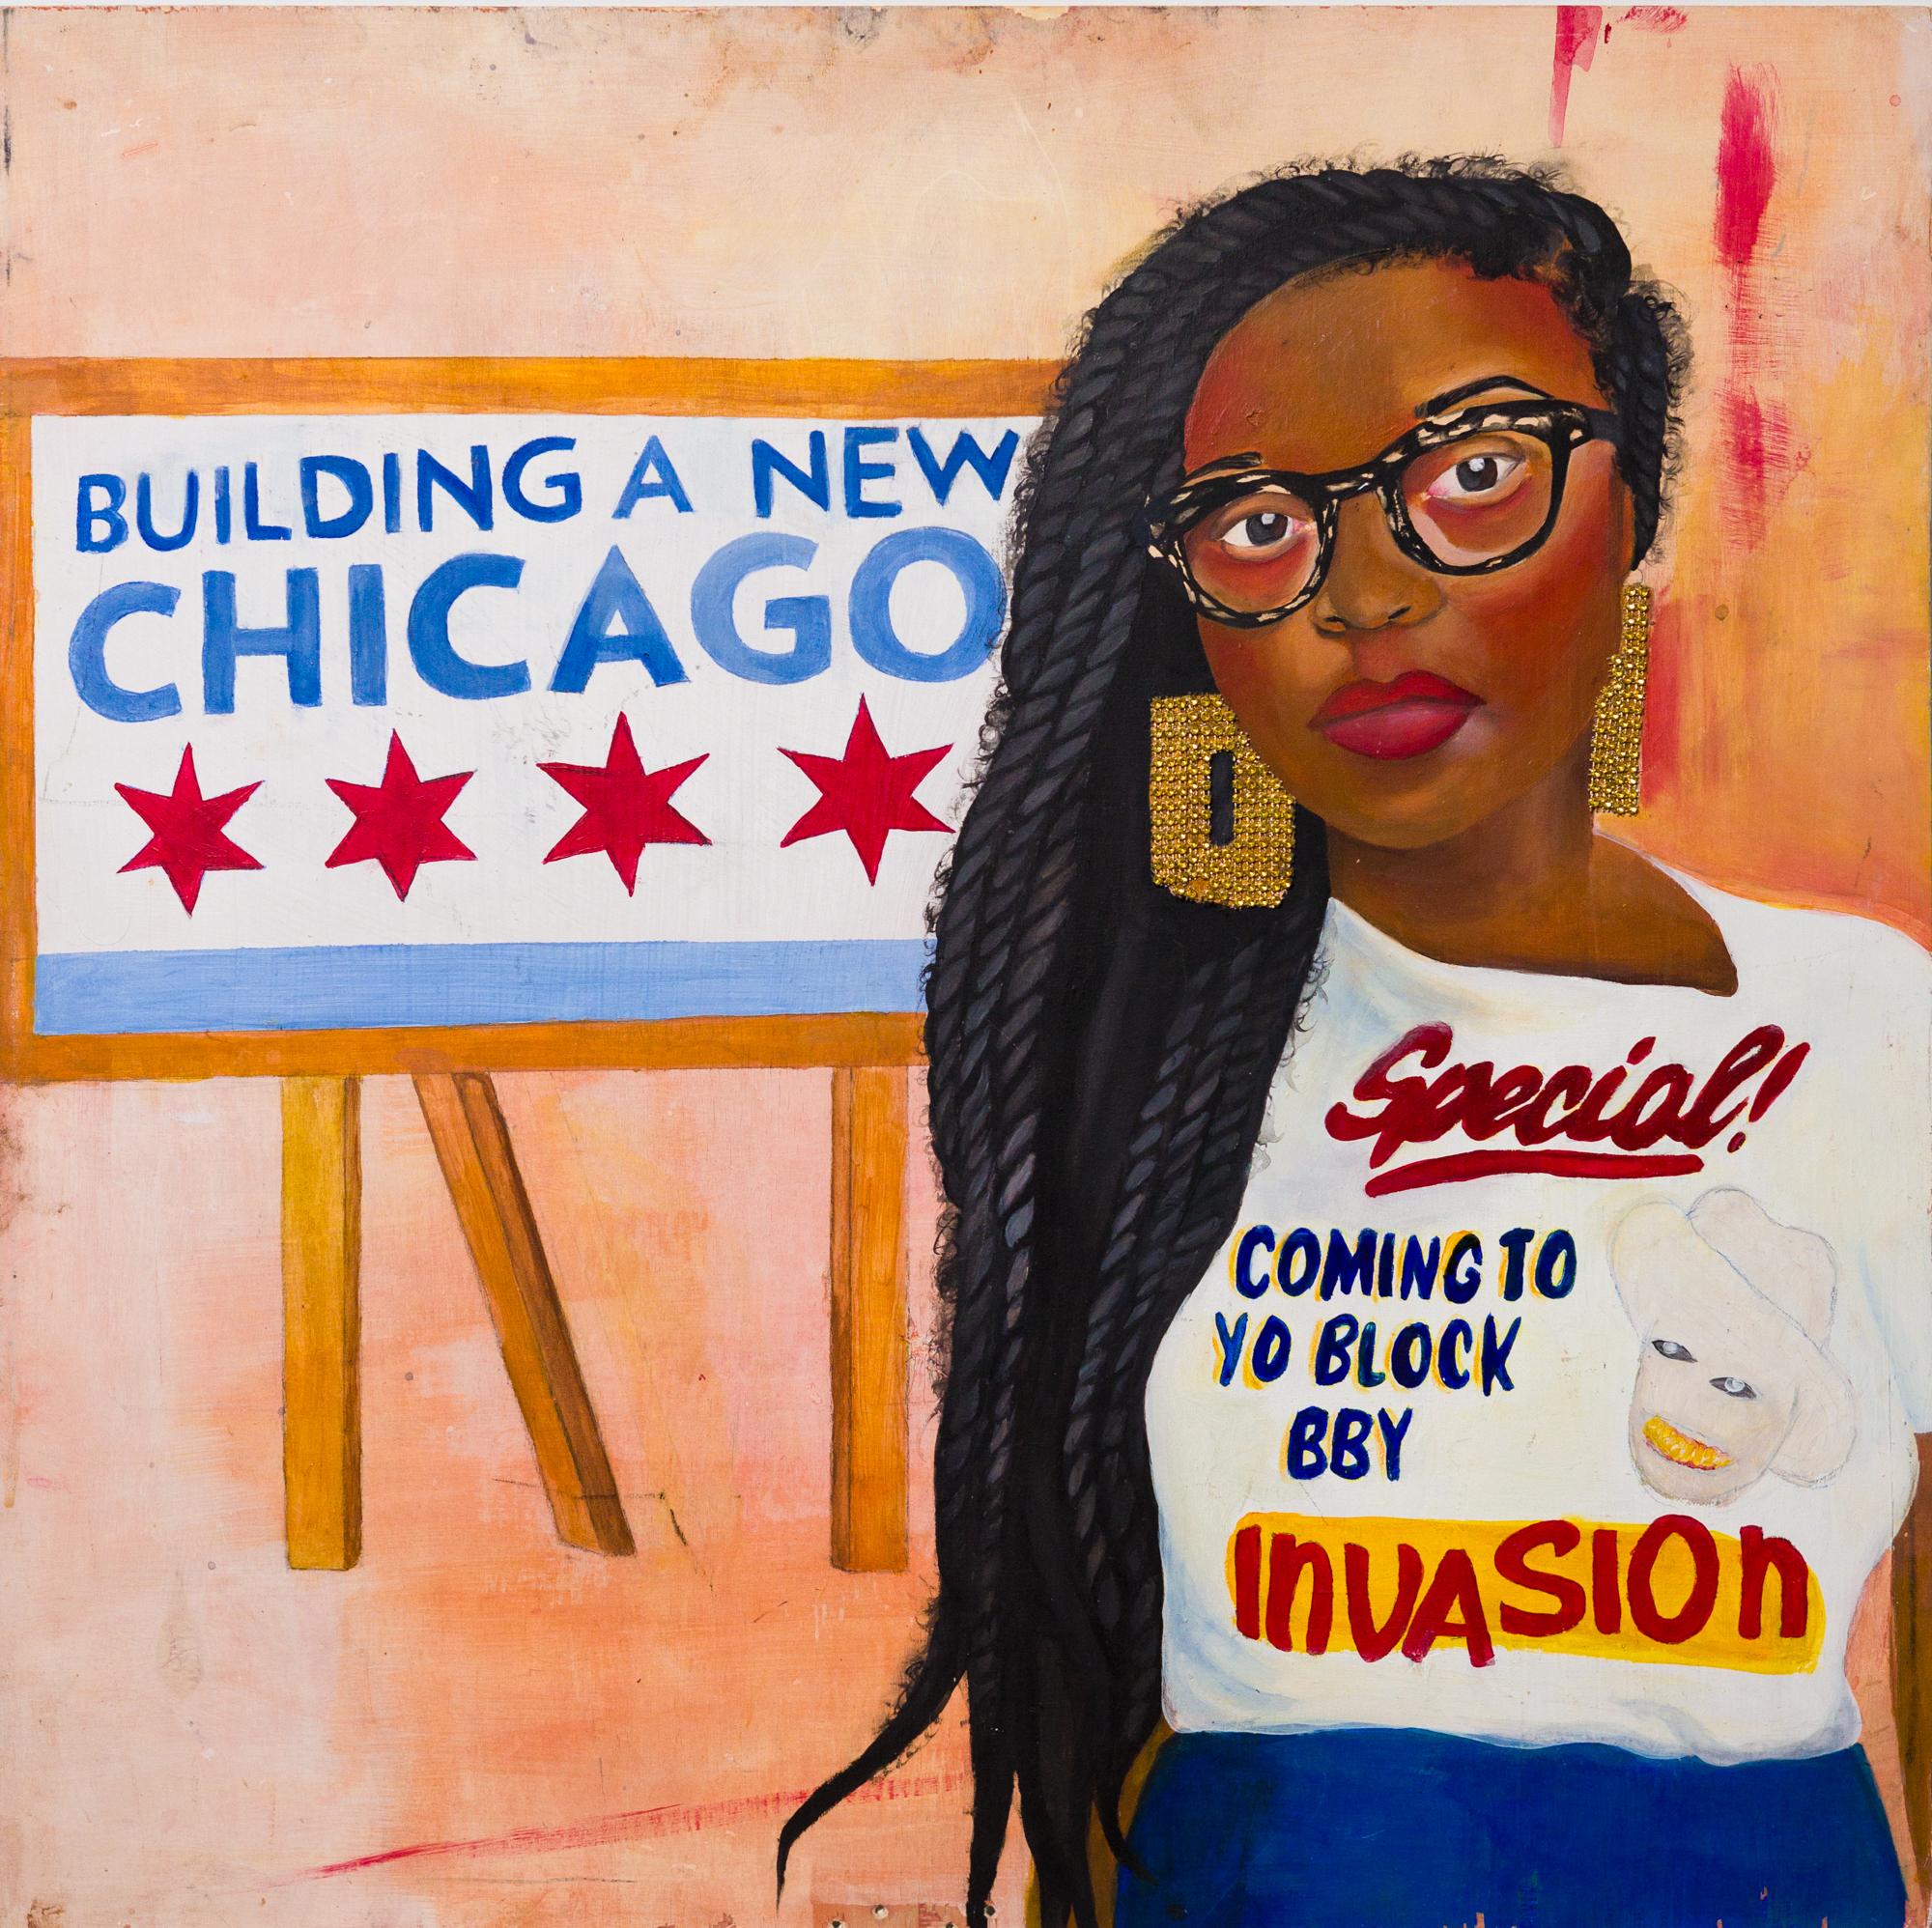 Qiaira Riley Figurative Painting - "An Invasion", Chicago, Woman figure, social change, Acrylic on Wood 